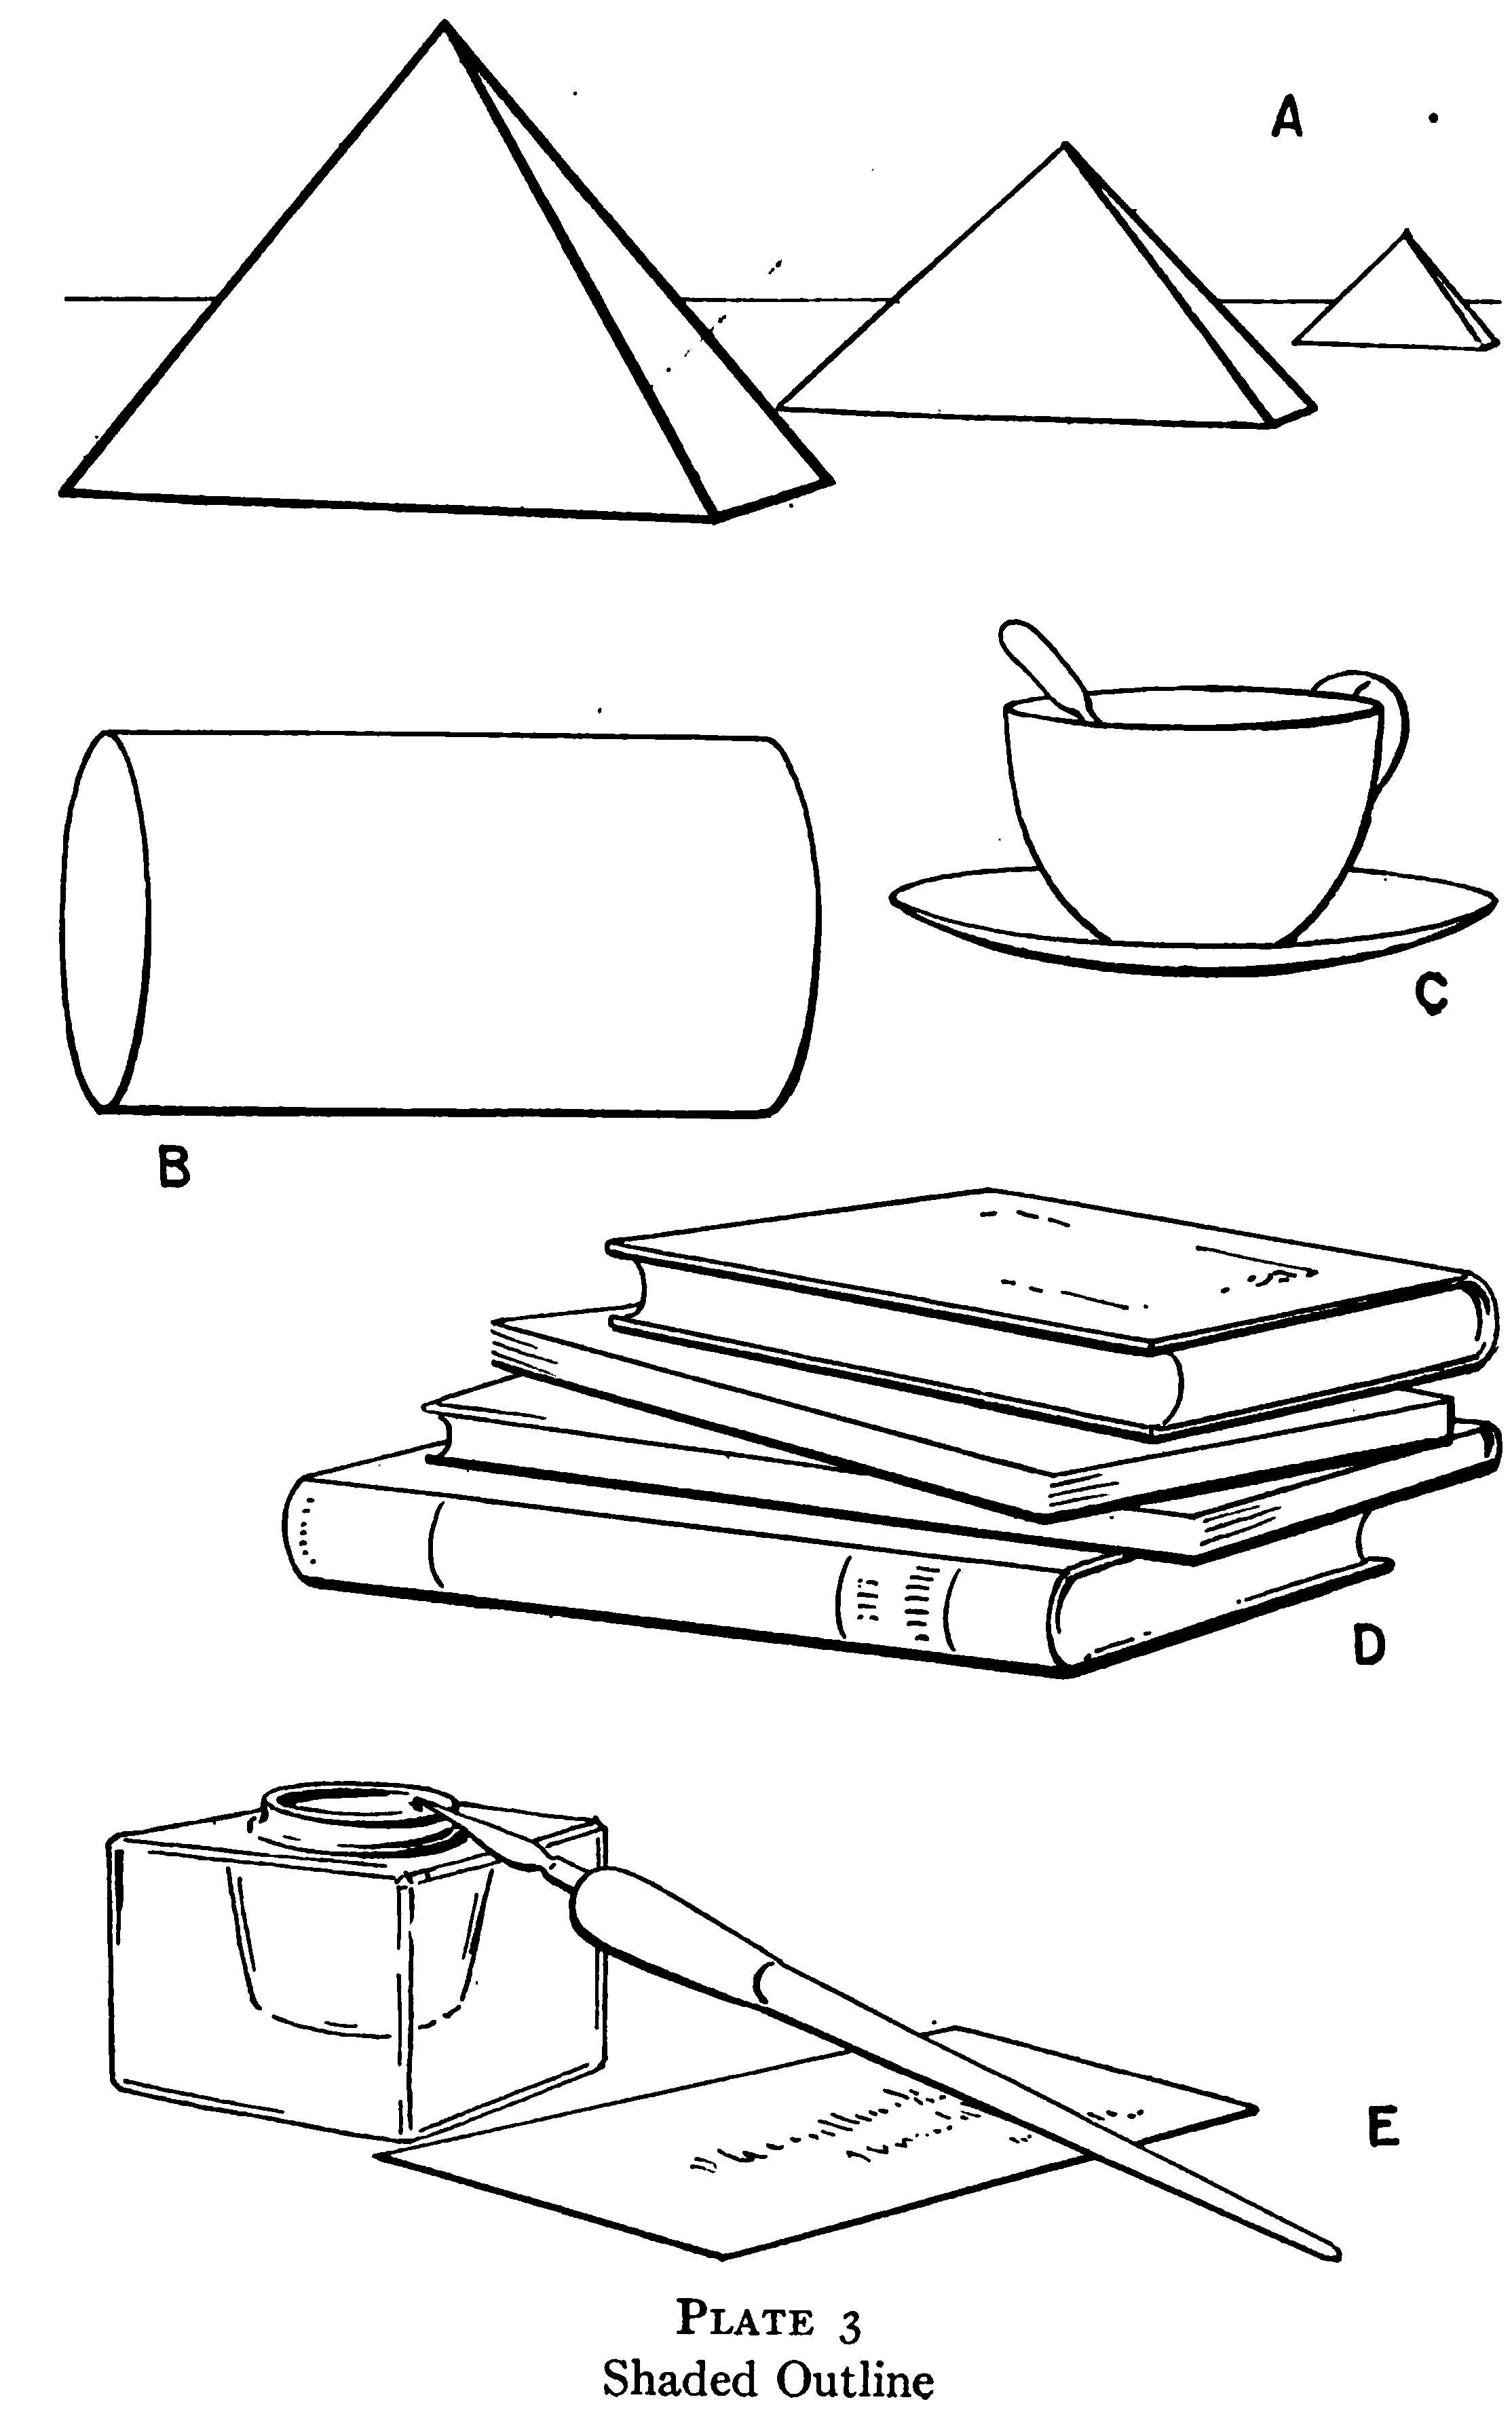 Practice Drawing Outlines and Contours of Object or Person You Are